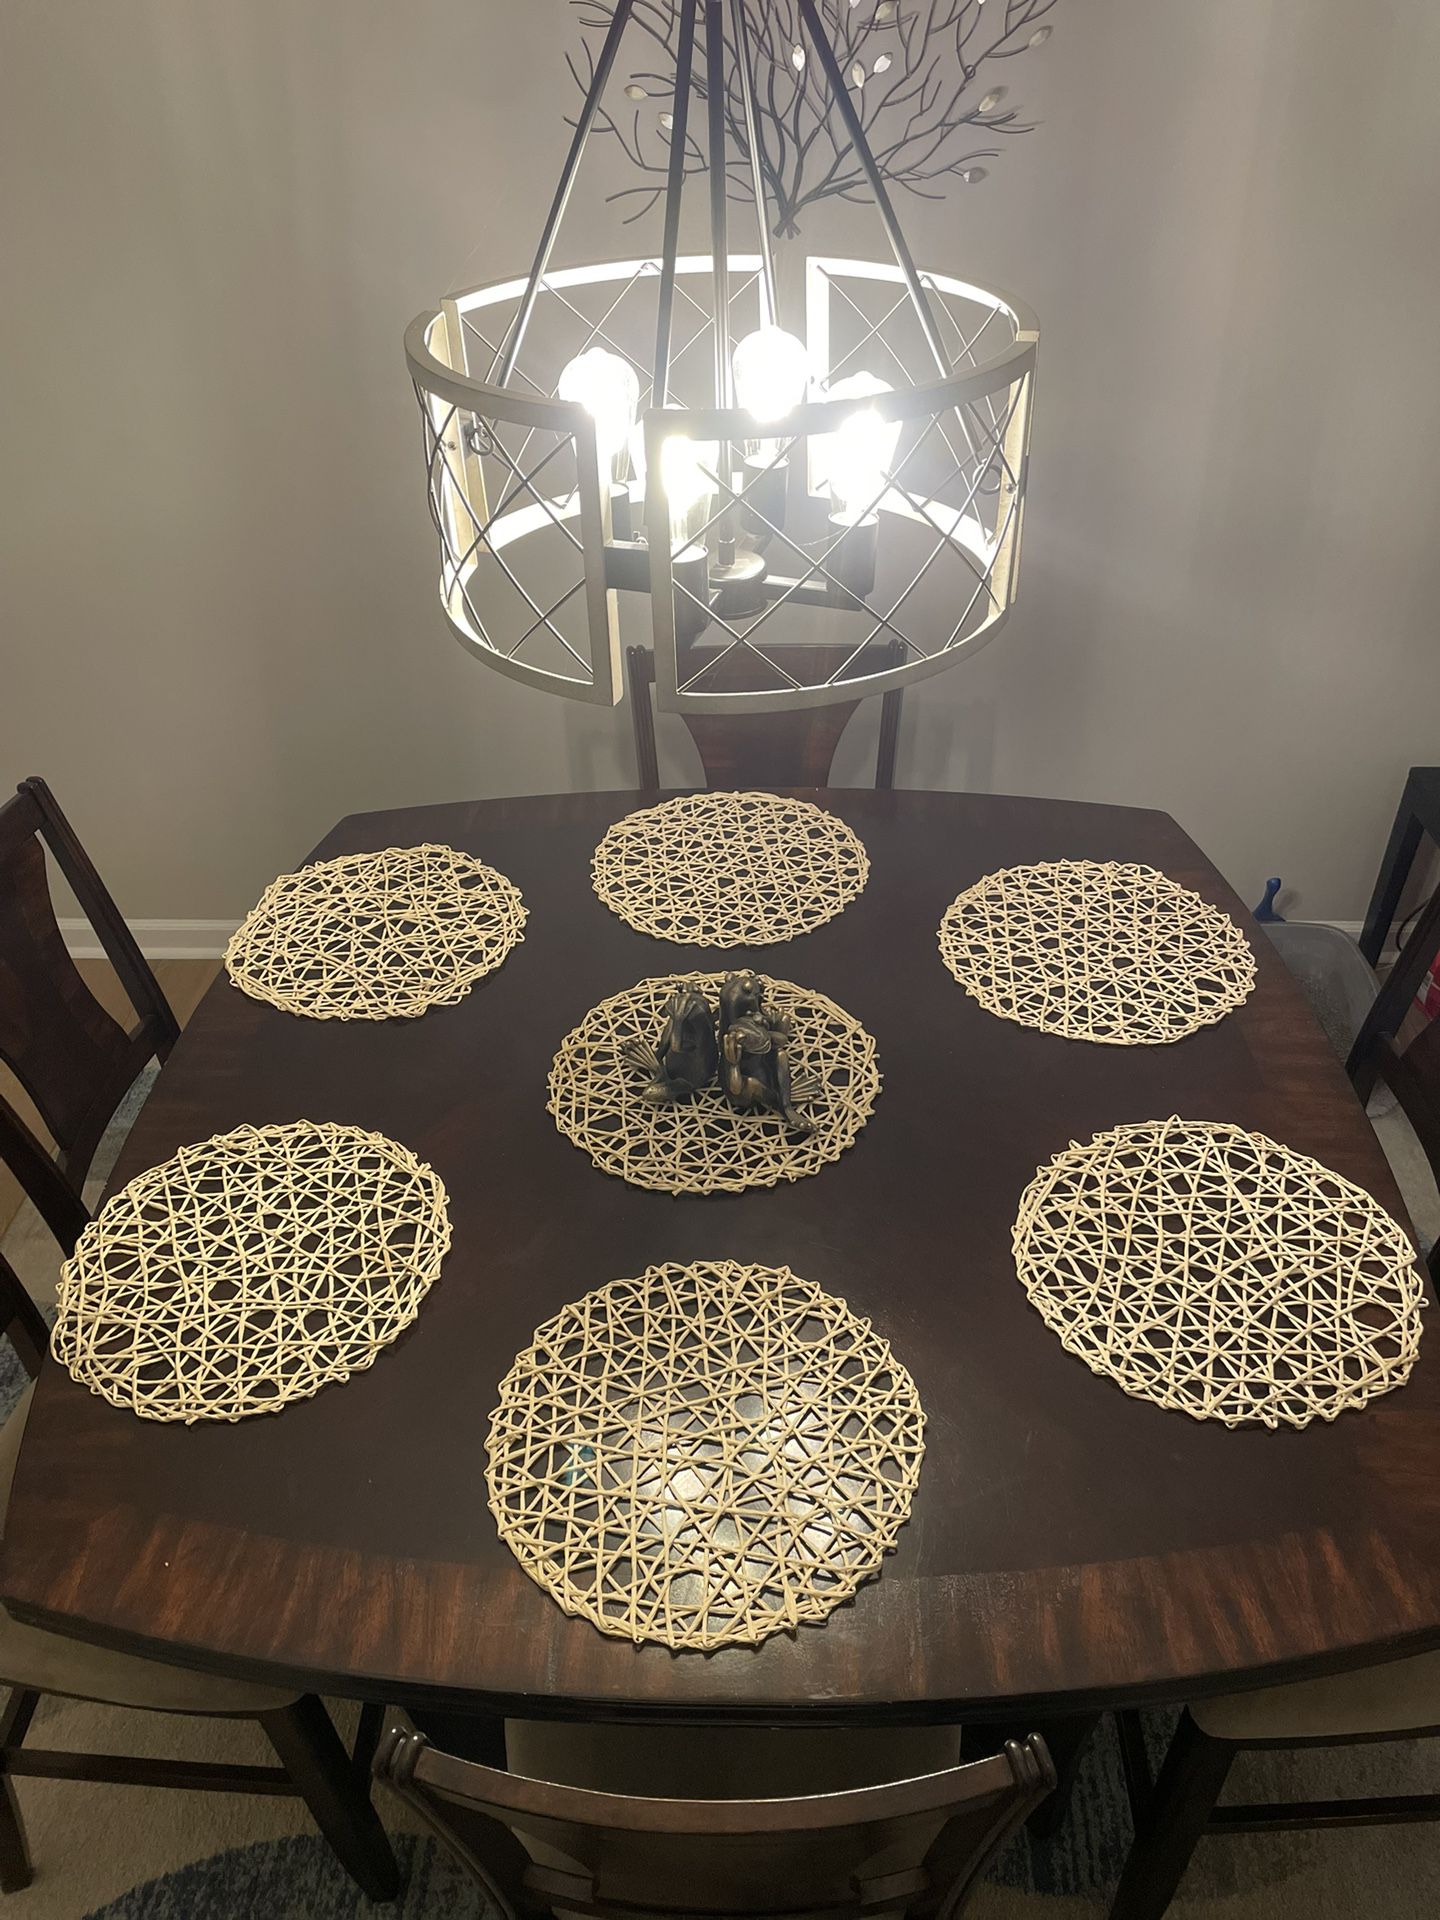 Table with six chairs in excellent condition